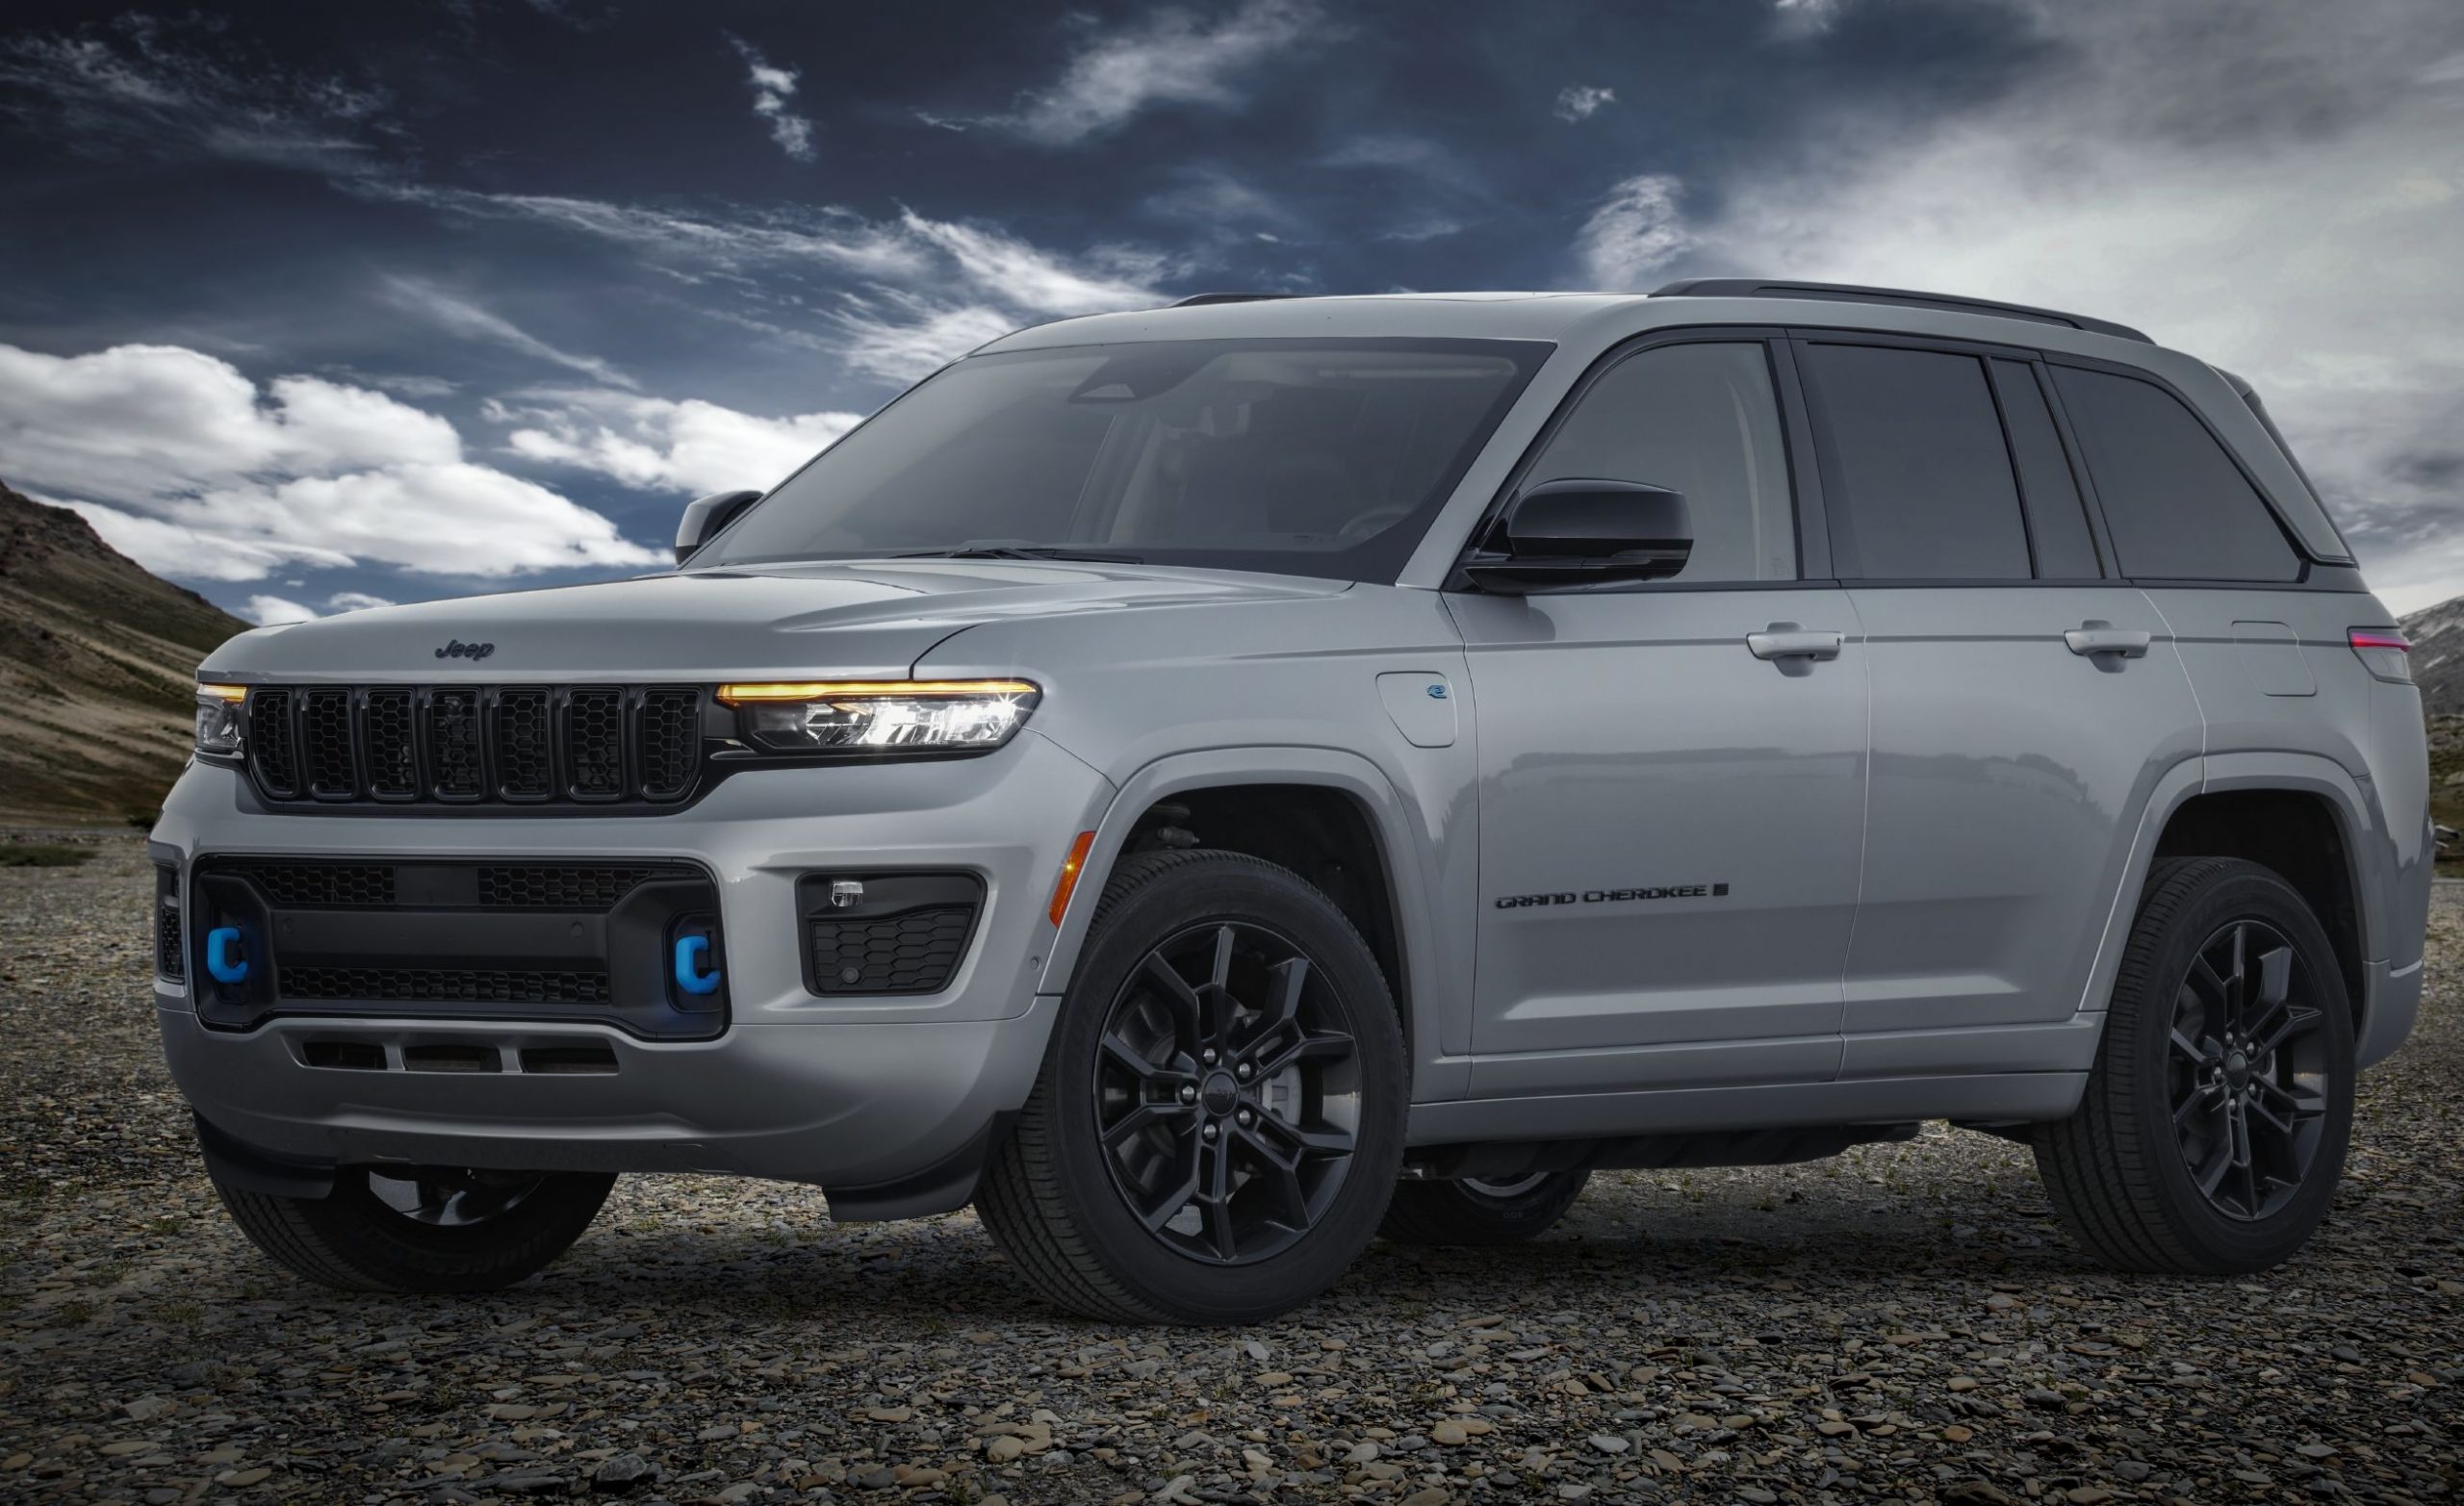 Jeep Grand Cherokee, Wrangler Willys Special Editions Come to Detroit Auto Show